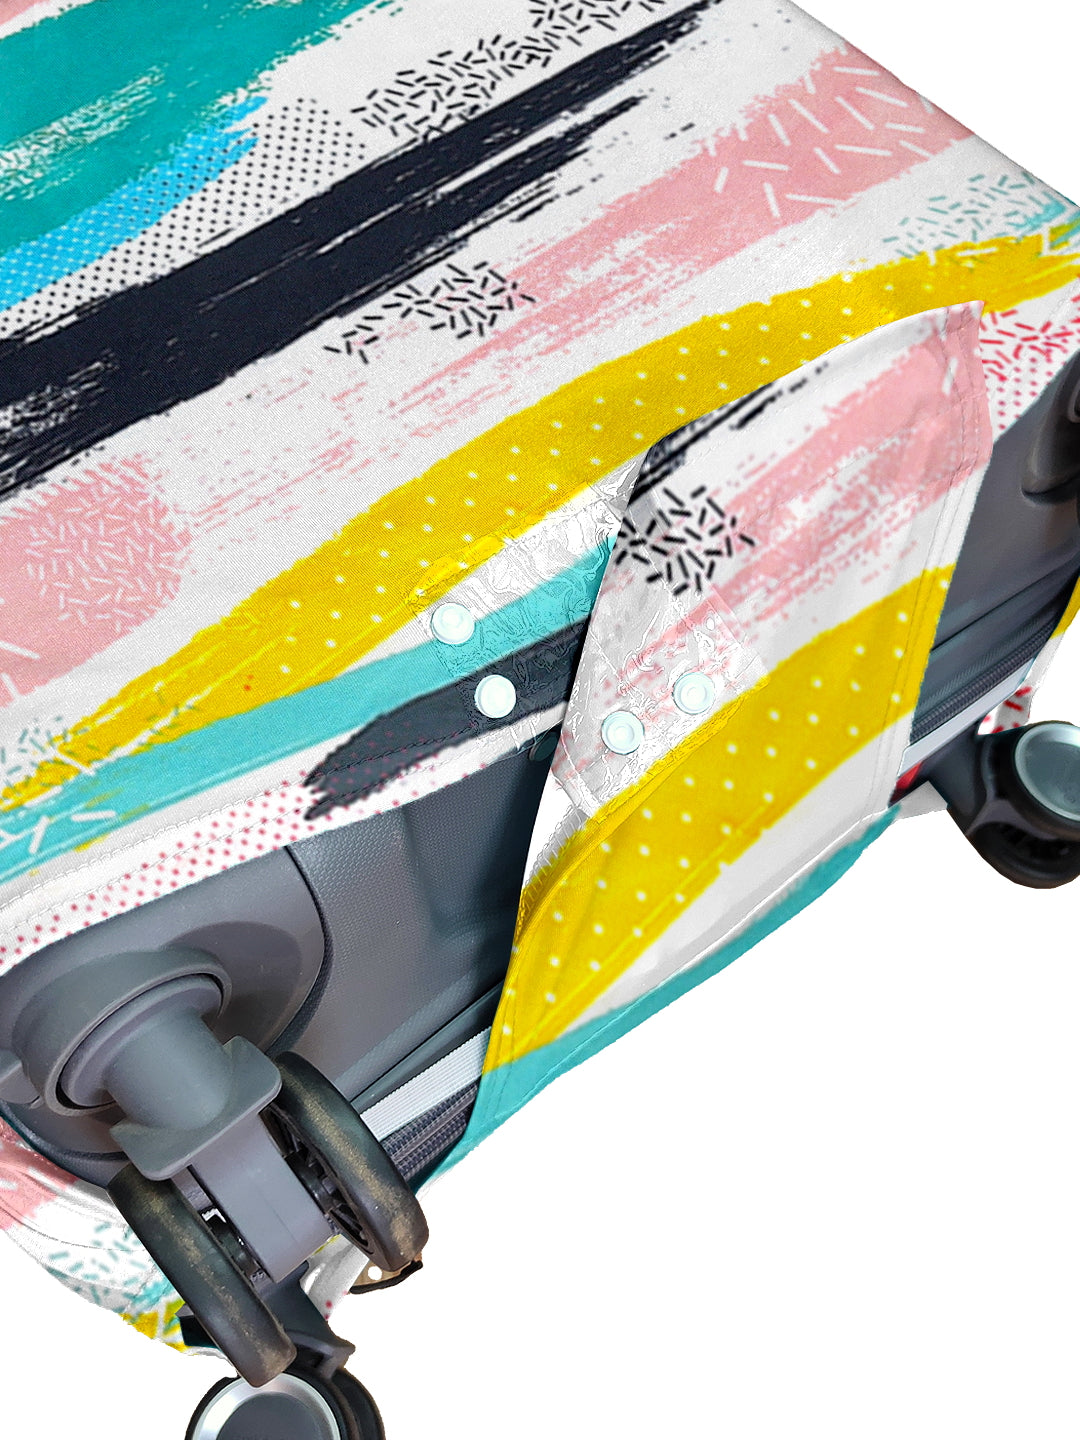 Stretchable Printed Protective Luggage Bag Cover Small- Multicolour